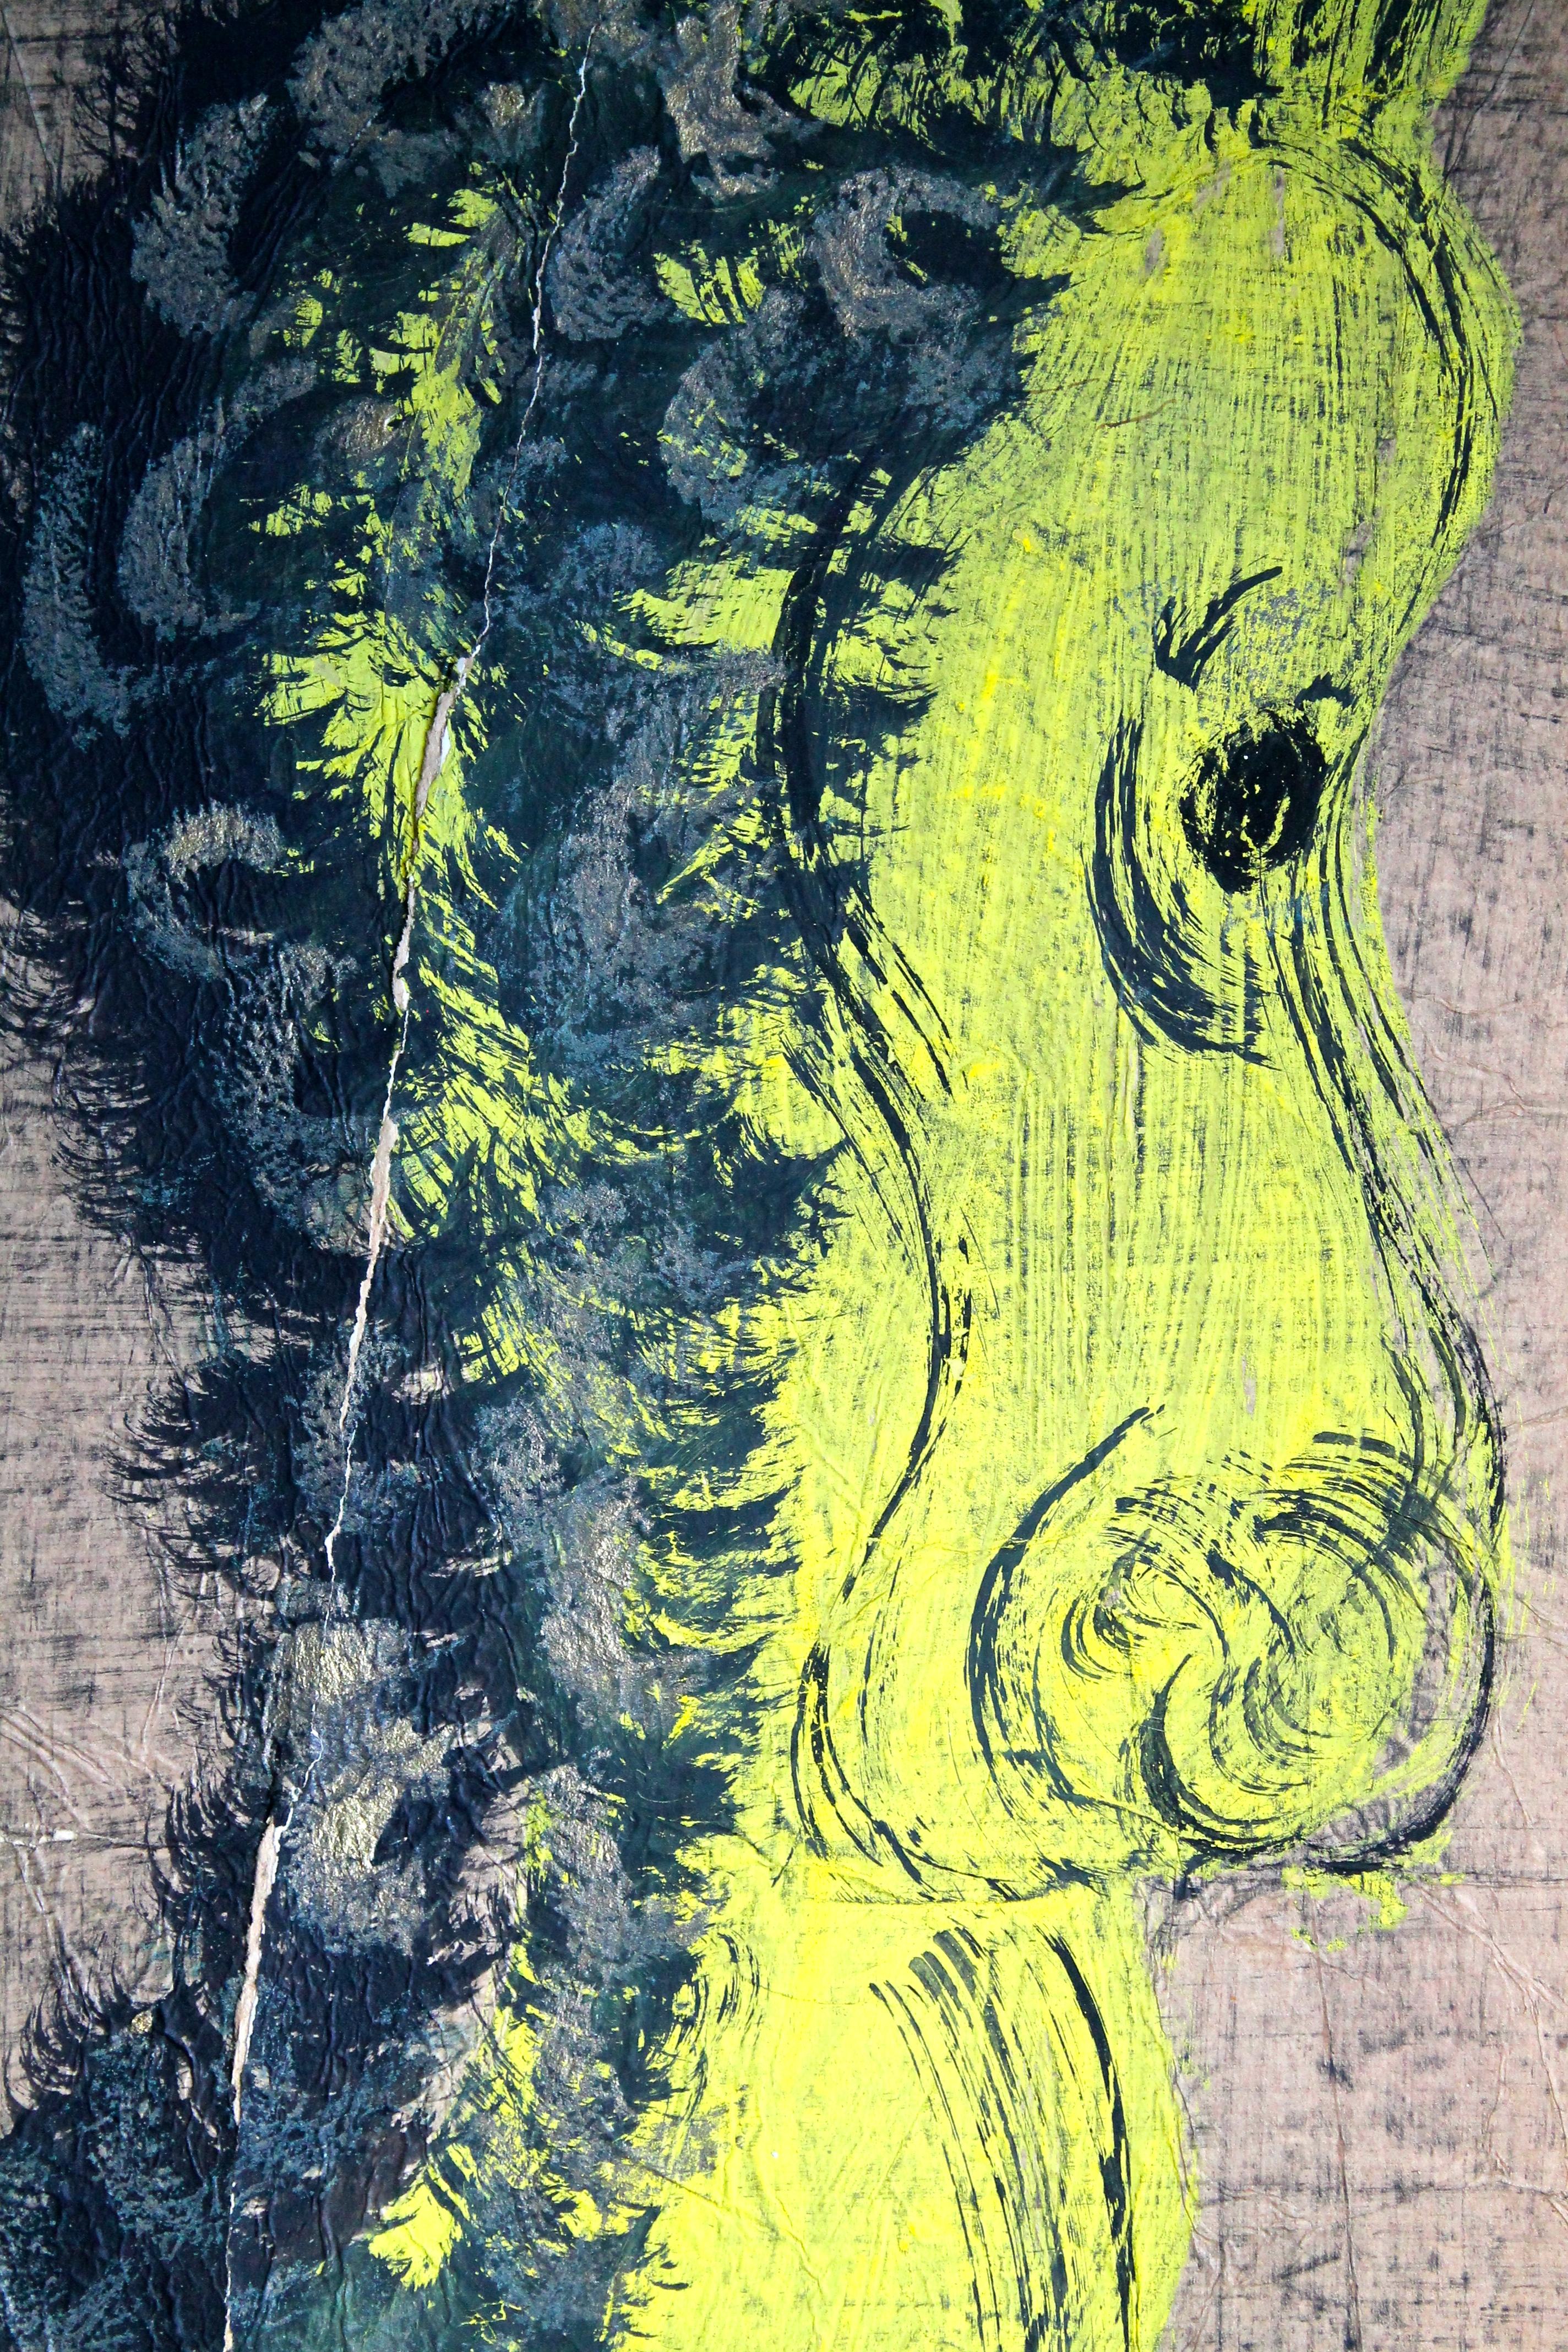 Expressionist 'Chucho' Reyes Signed Gouache of a Horse on Mounted Paper For Sale